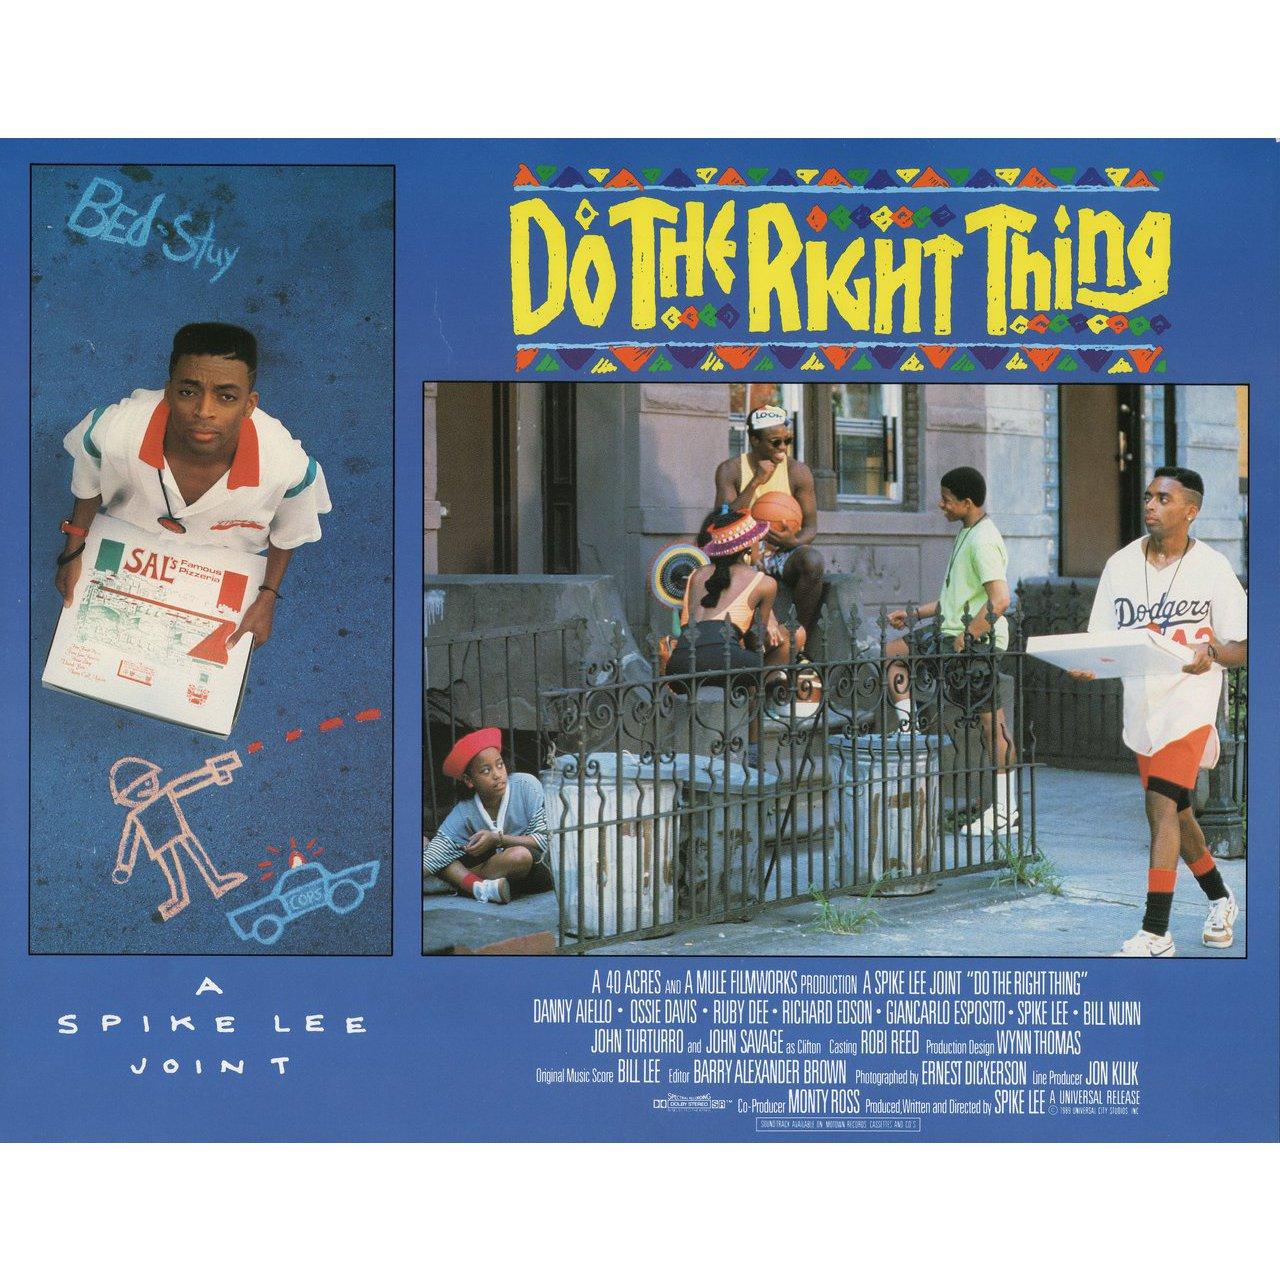 Original 1989 U.S. scene card for the film Do the Right Thing directed by Spike Lee with Danny Aiello / John Turturro / Ossie Davis / Ruby Dee / Richard Edson. Very Good-Fine condition, folded. Many original posters were issued folded or were